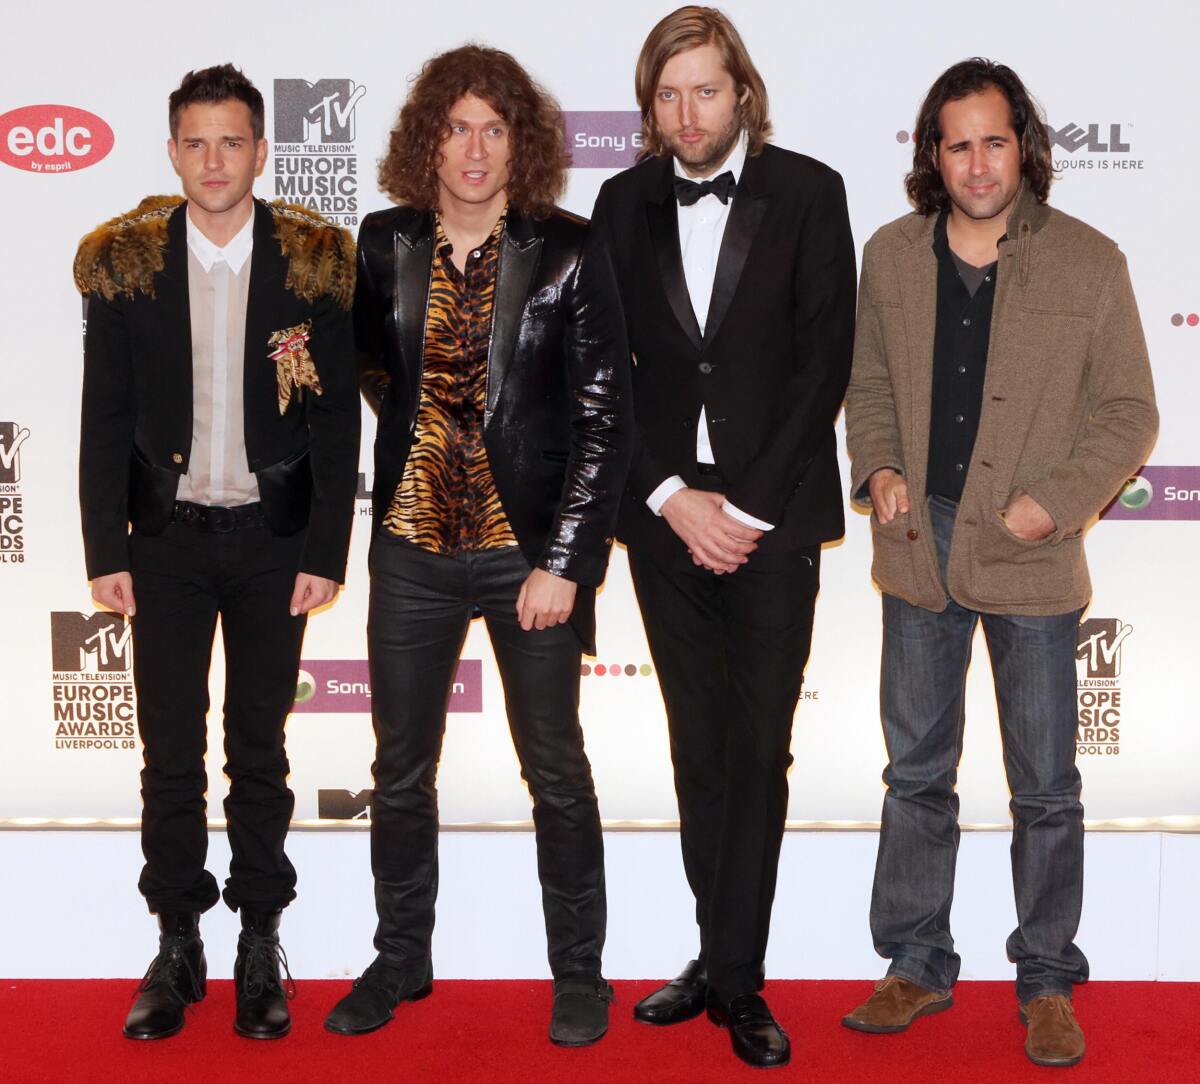 The Killers arrive at the 2008 MTV Europe Music Awards